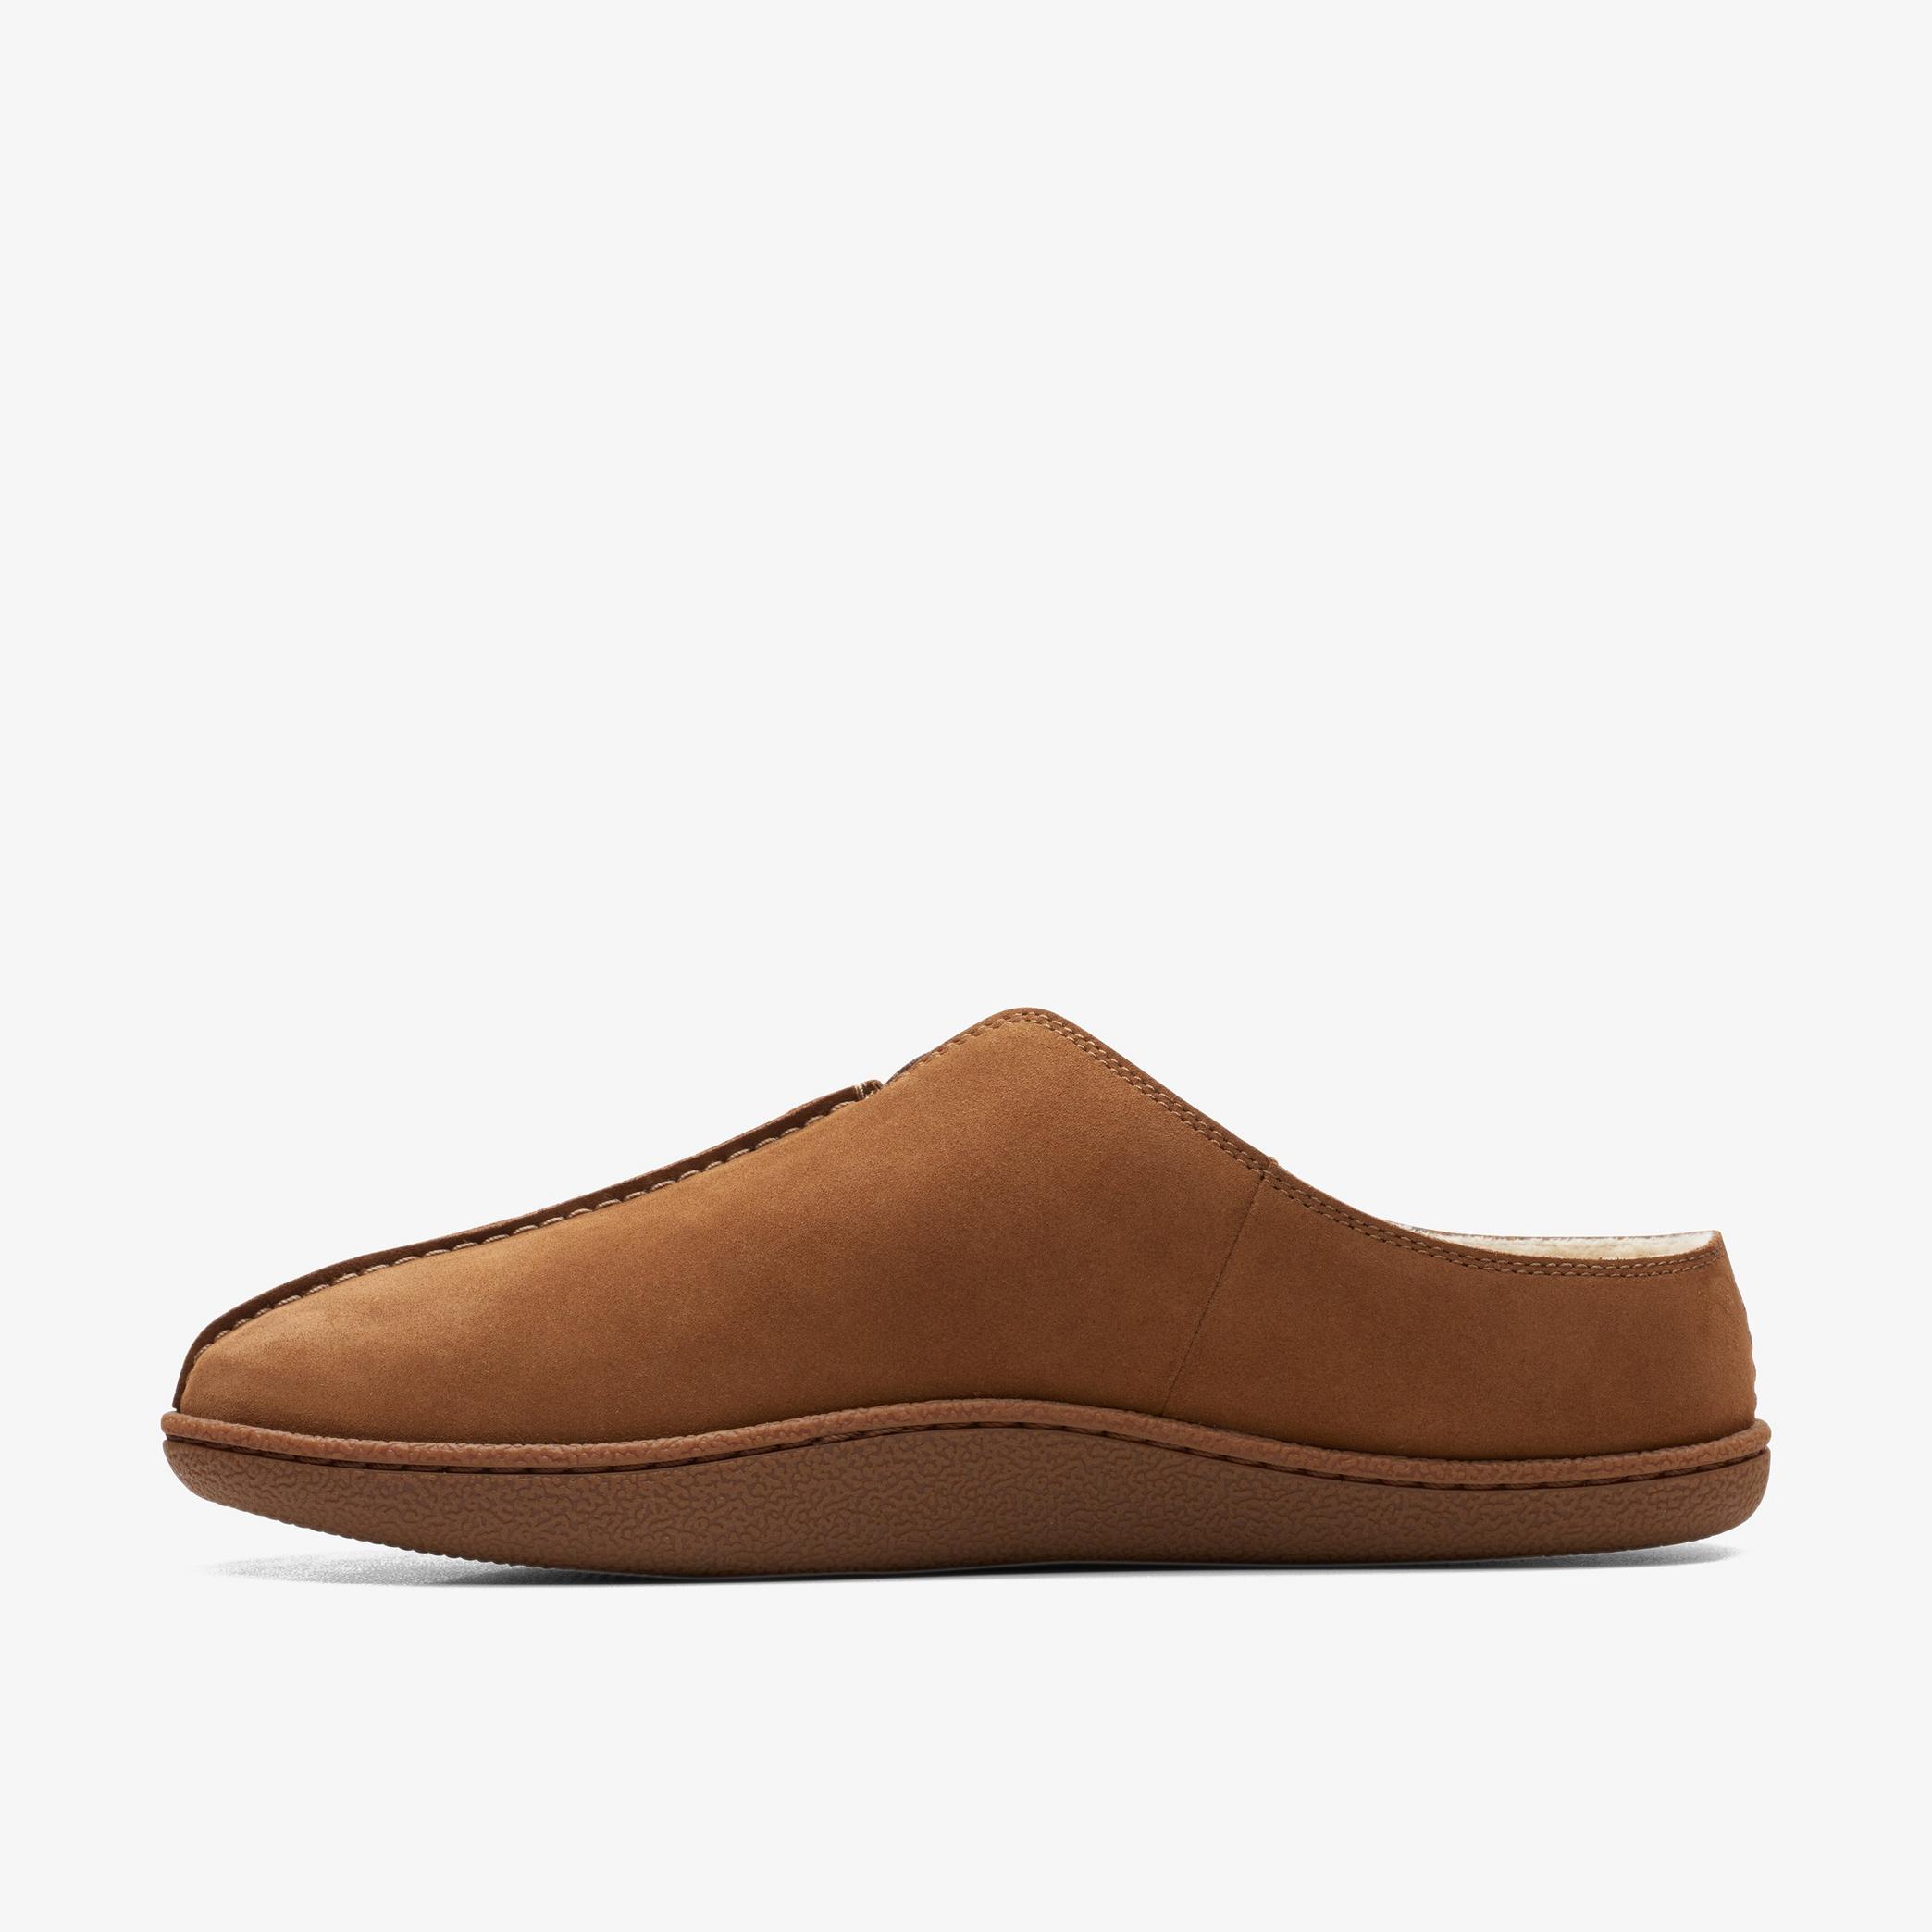 Home Mule Tan Suede Slippers, view 2 of 6